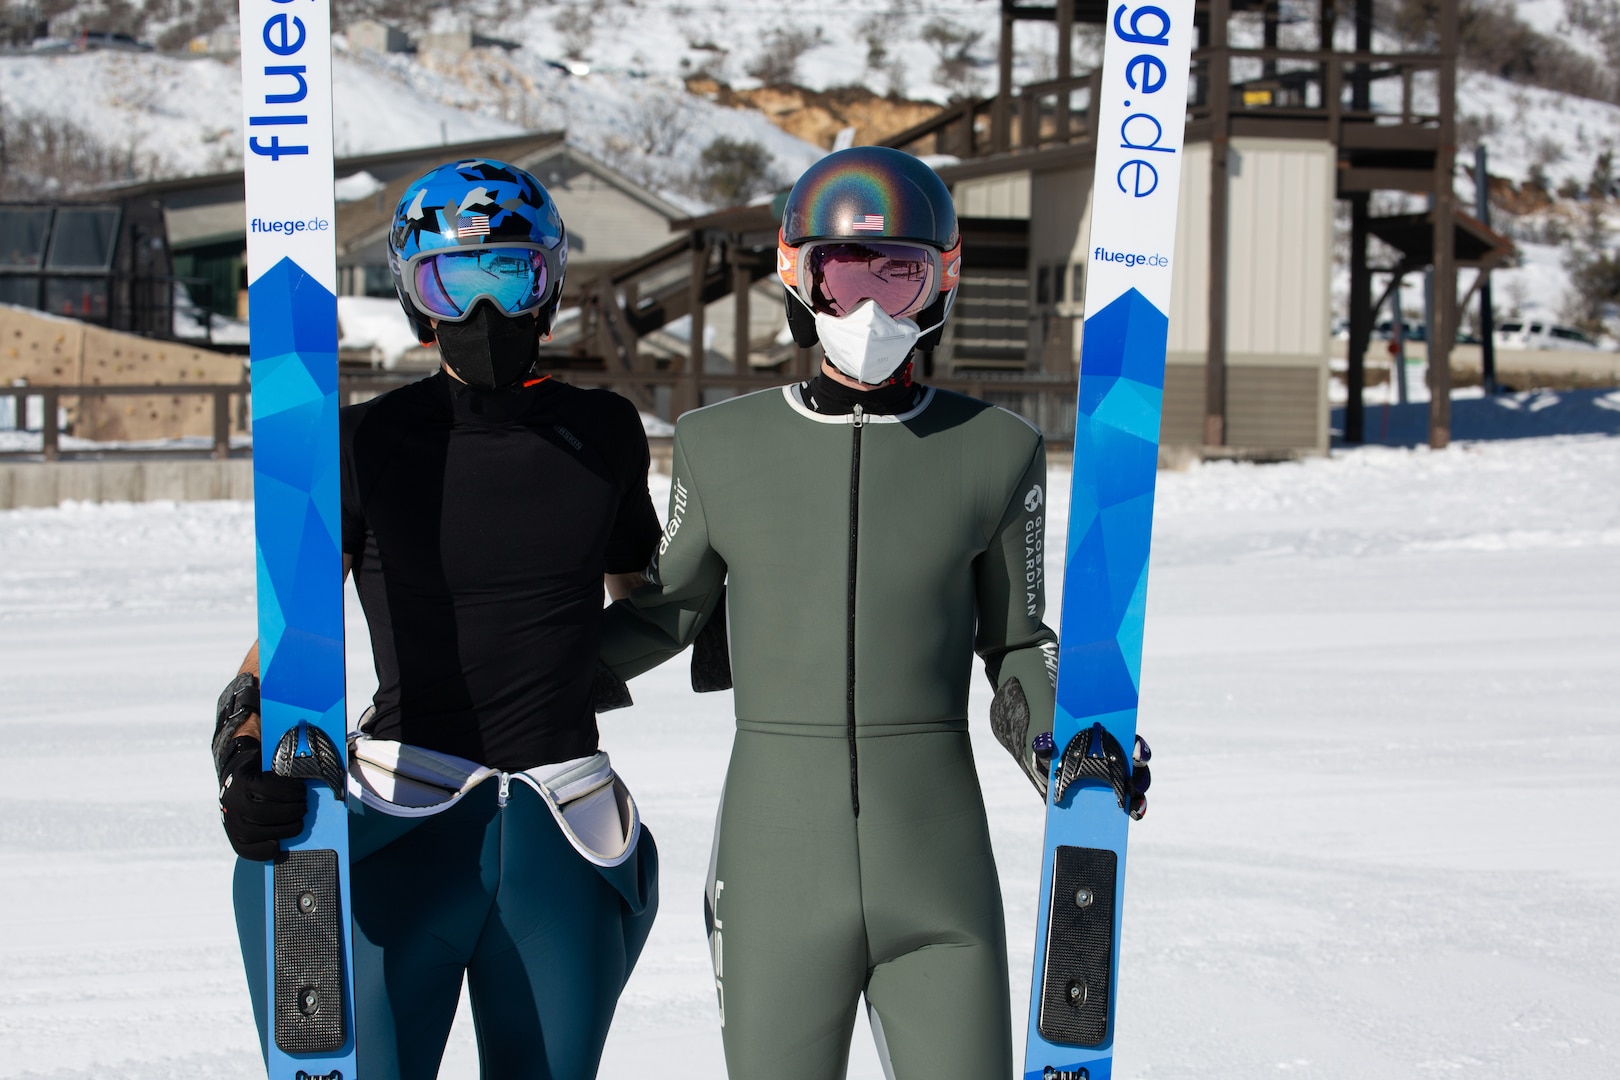 Utah National Guard Spcs. Benjamin Loomis of Eau Claire, Wisconsin and Jasper Good of Steamboat Springs, Colorado, after practice jumps at the Utah Olympic Park, Park City, Utah, Jan. 27, 2022. Good and Loomis are  going to China on the 2022 U.S. Olympic Nordic Combined Team.